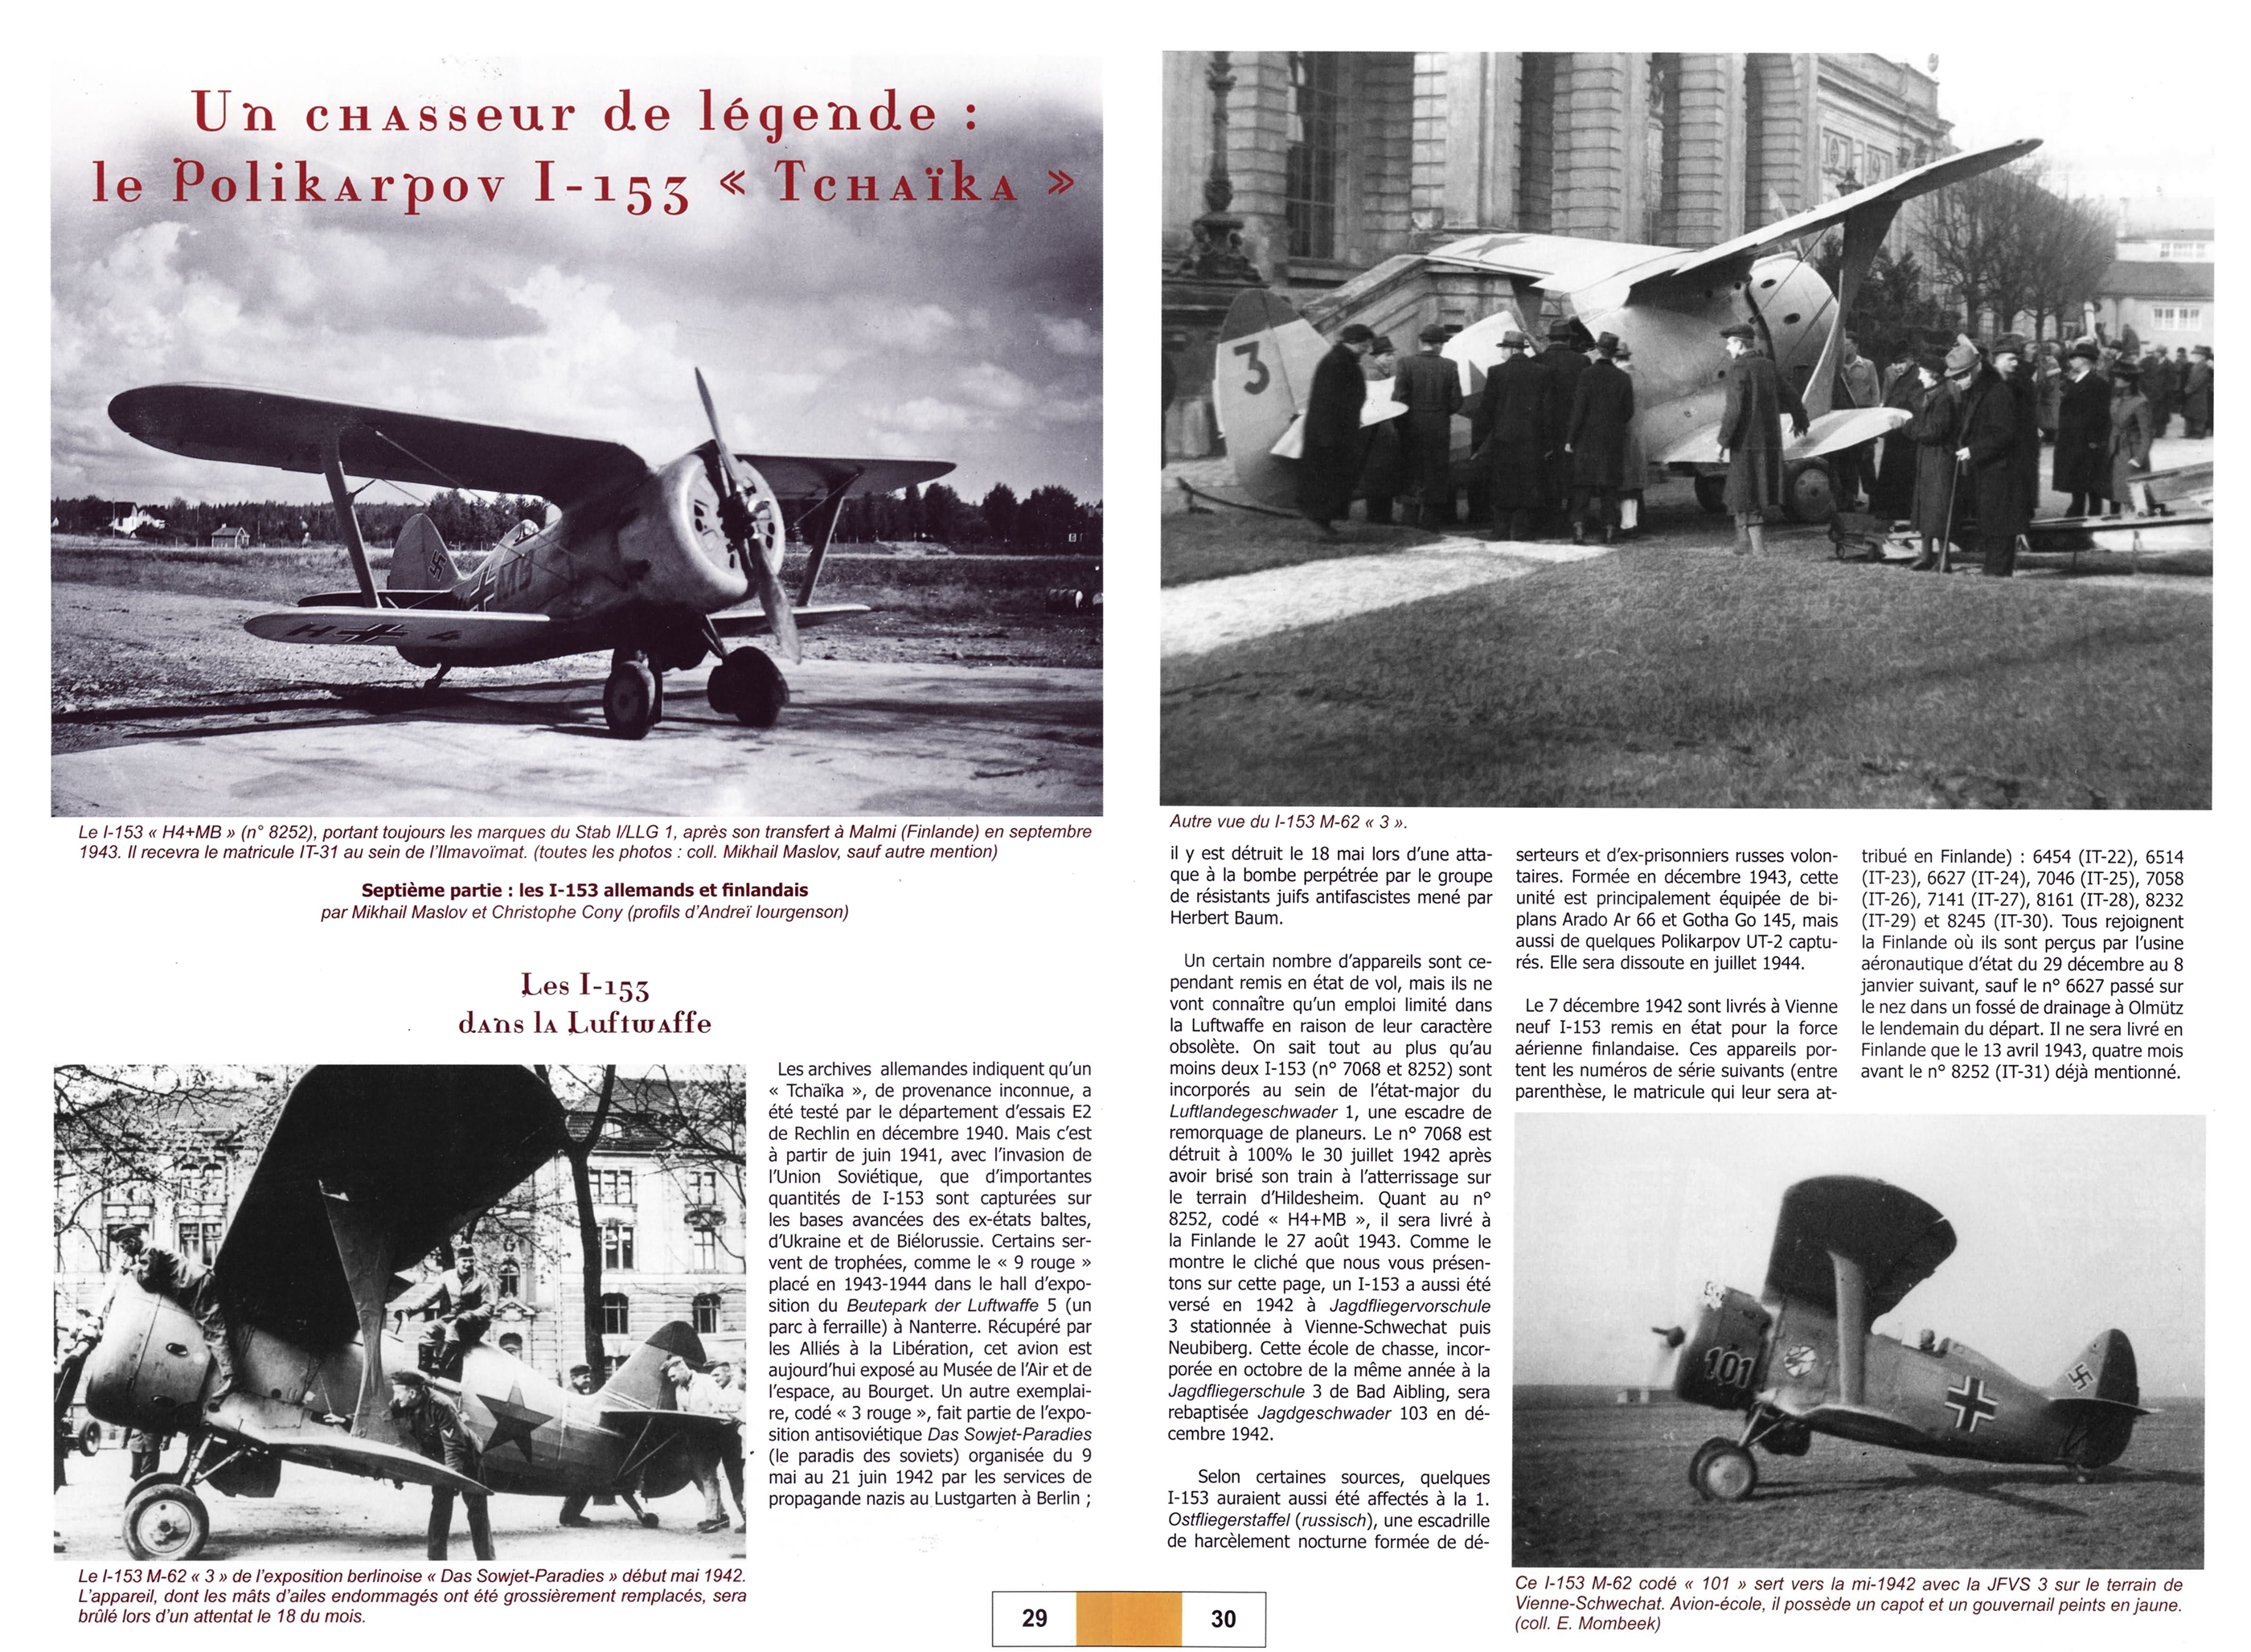 Article by French magazine Avions 173 about Polikarpov I 15 pages 29 30